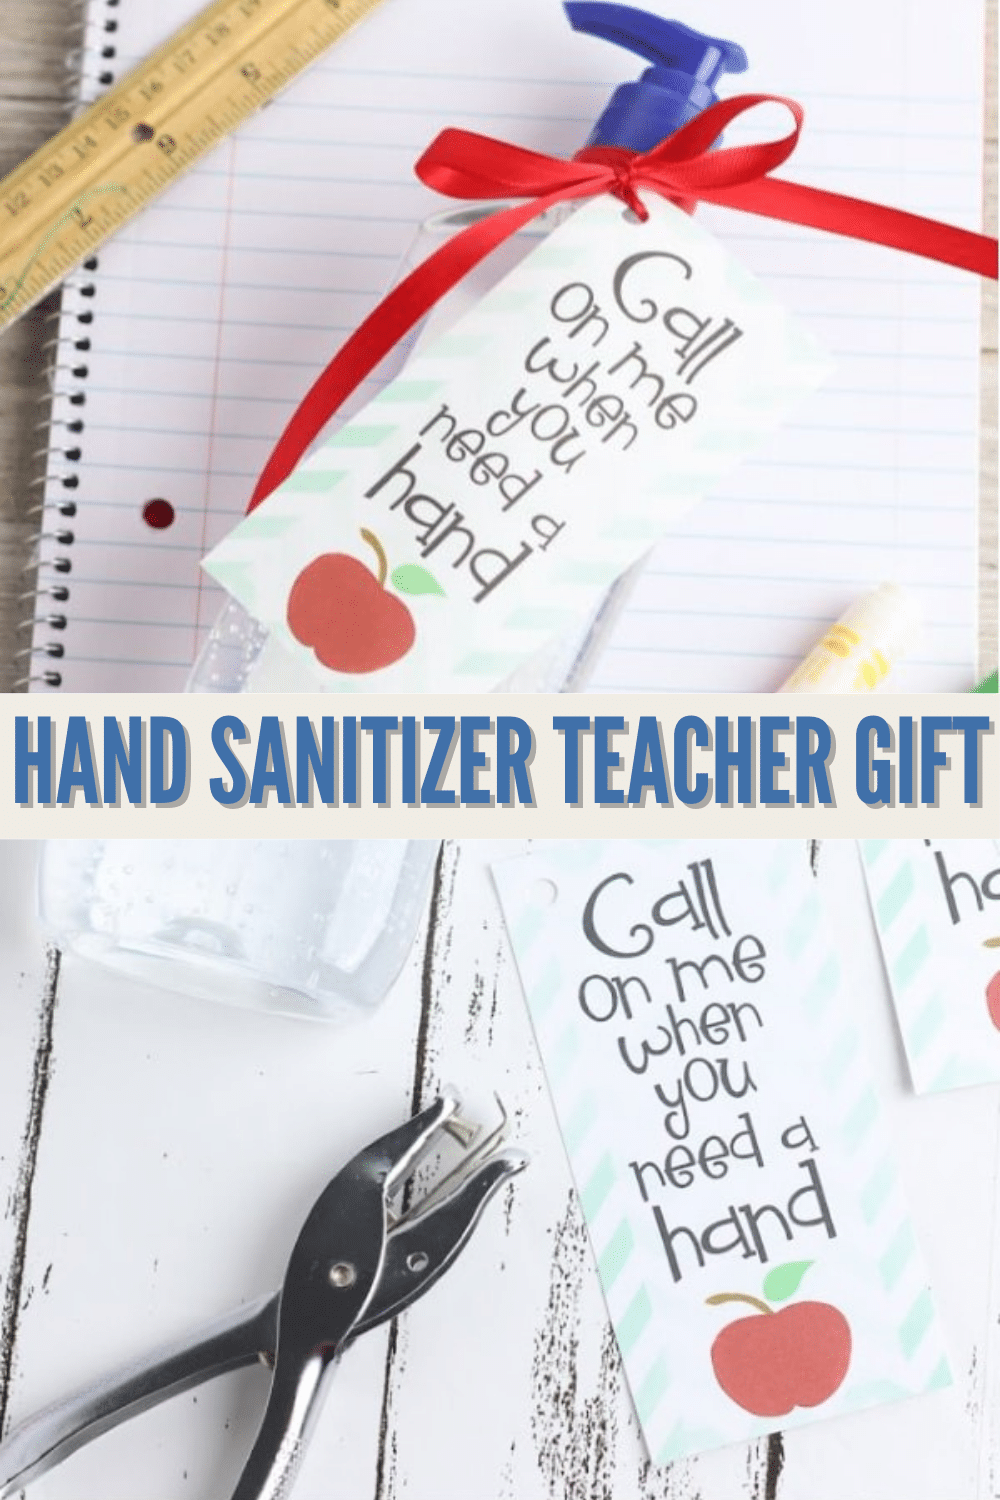 This Hand Sanitizer Teacher Gift is quick to make with a cute printable tag. Give hand sanitizer gifts to teachers and all school staff to show you care. #teachergifts #printables #printabletags via @wondermomwannab